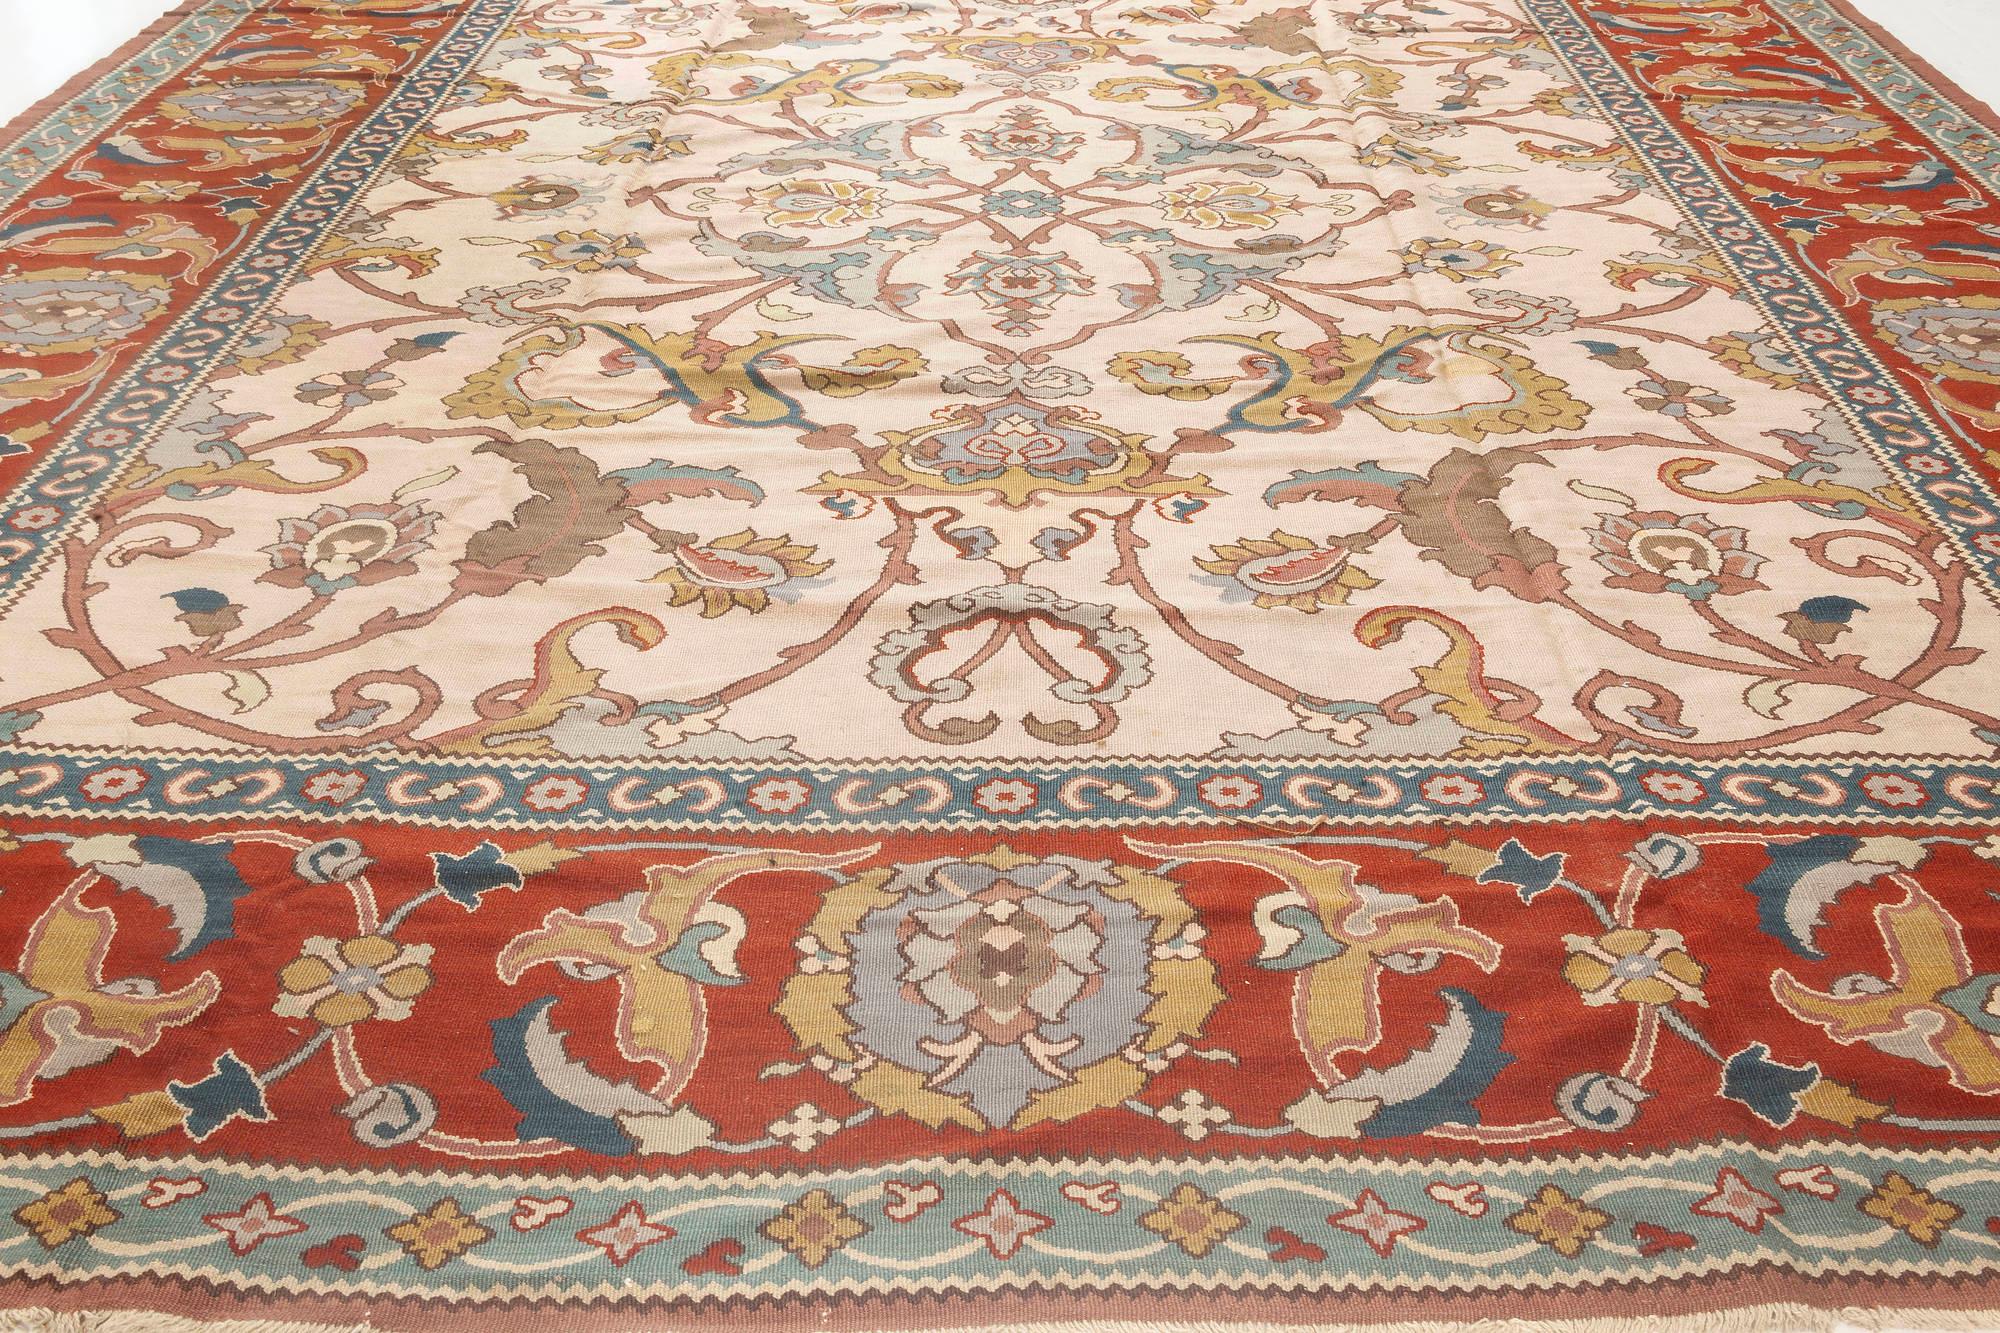 Contemporary Traditional Floral Design Flat-Weave Wool Rug by Doris Leslie Blau In New Condition For Sale In New York, NY